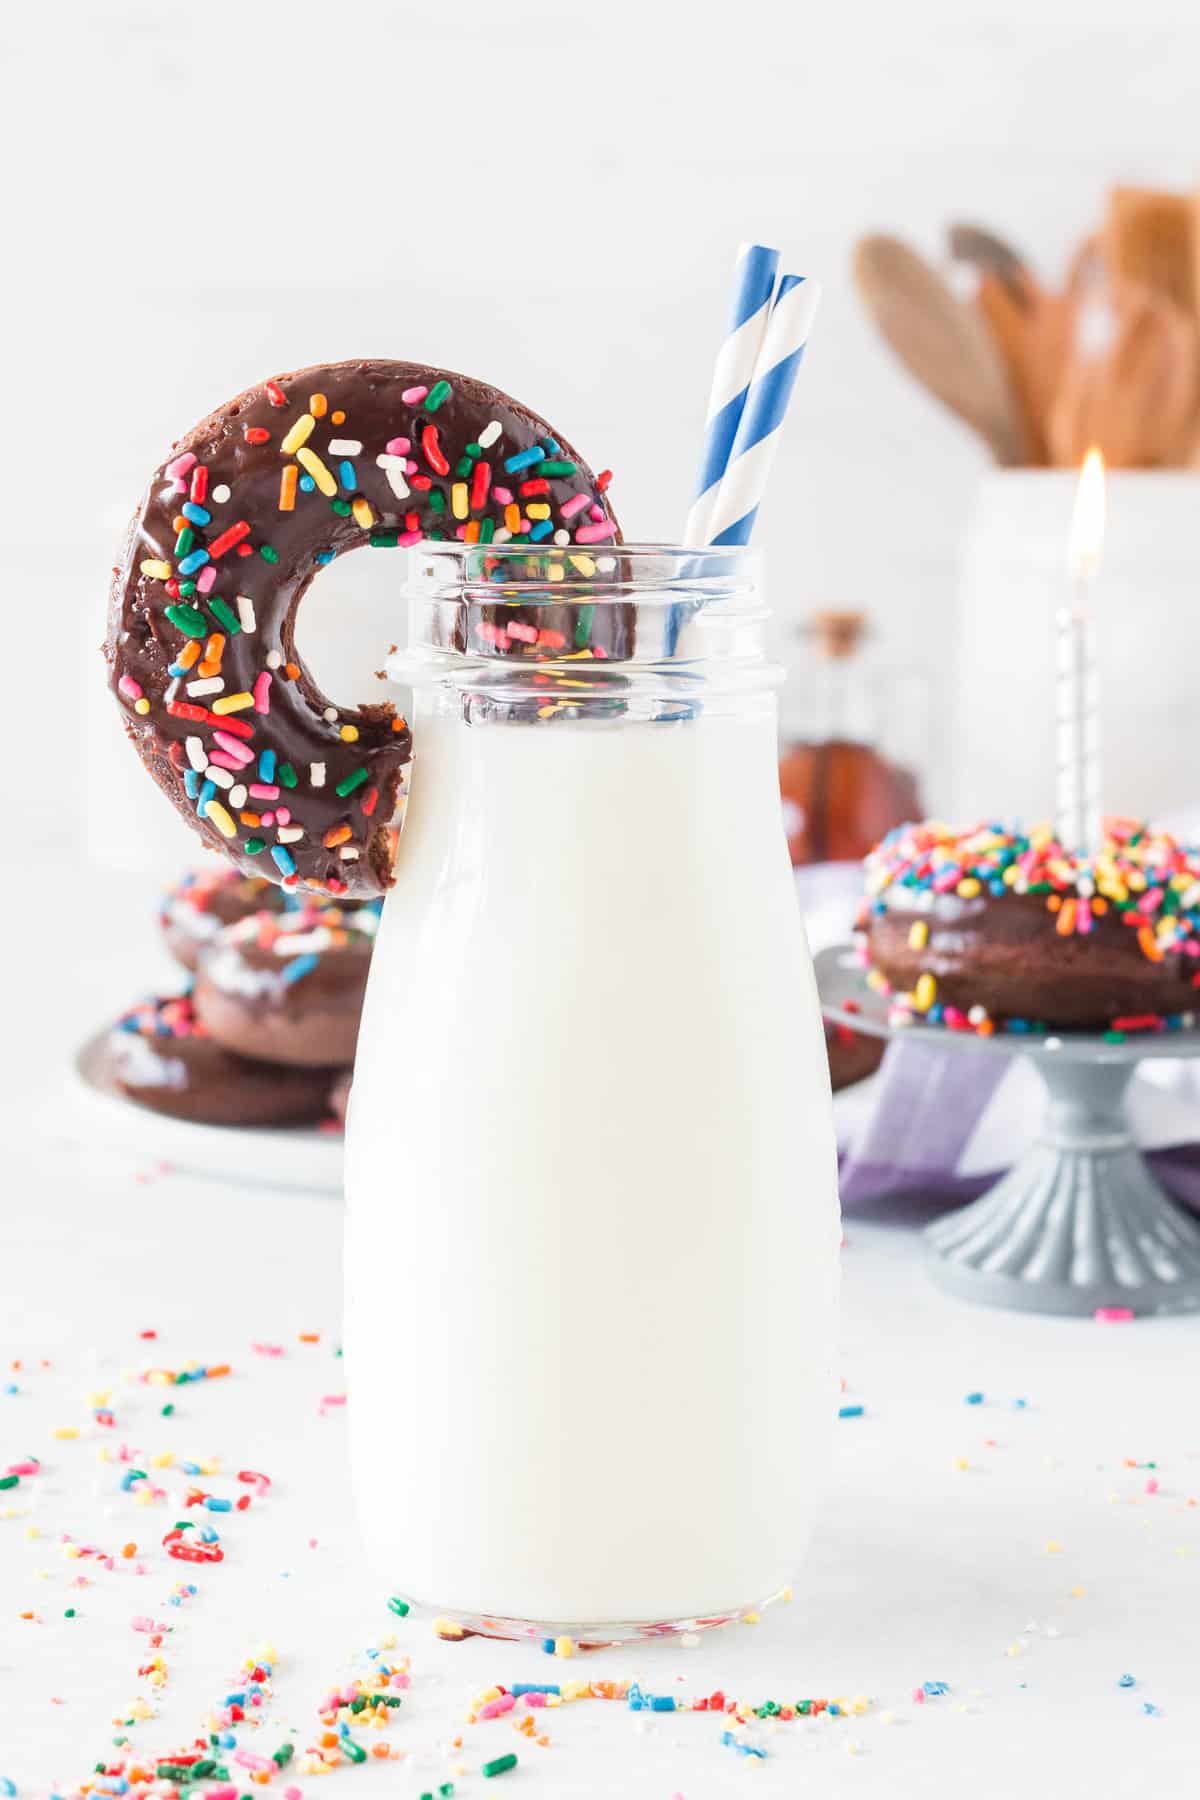 Donut propped on a bottle of milk.